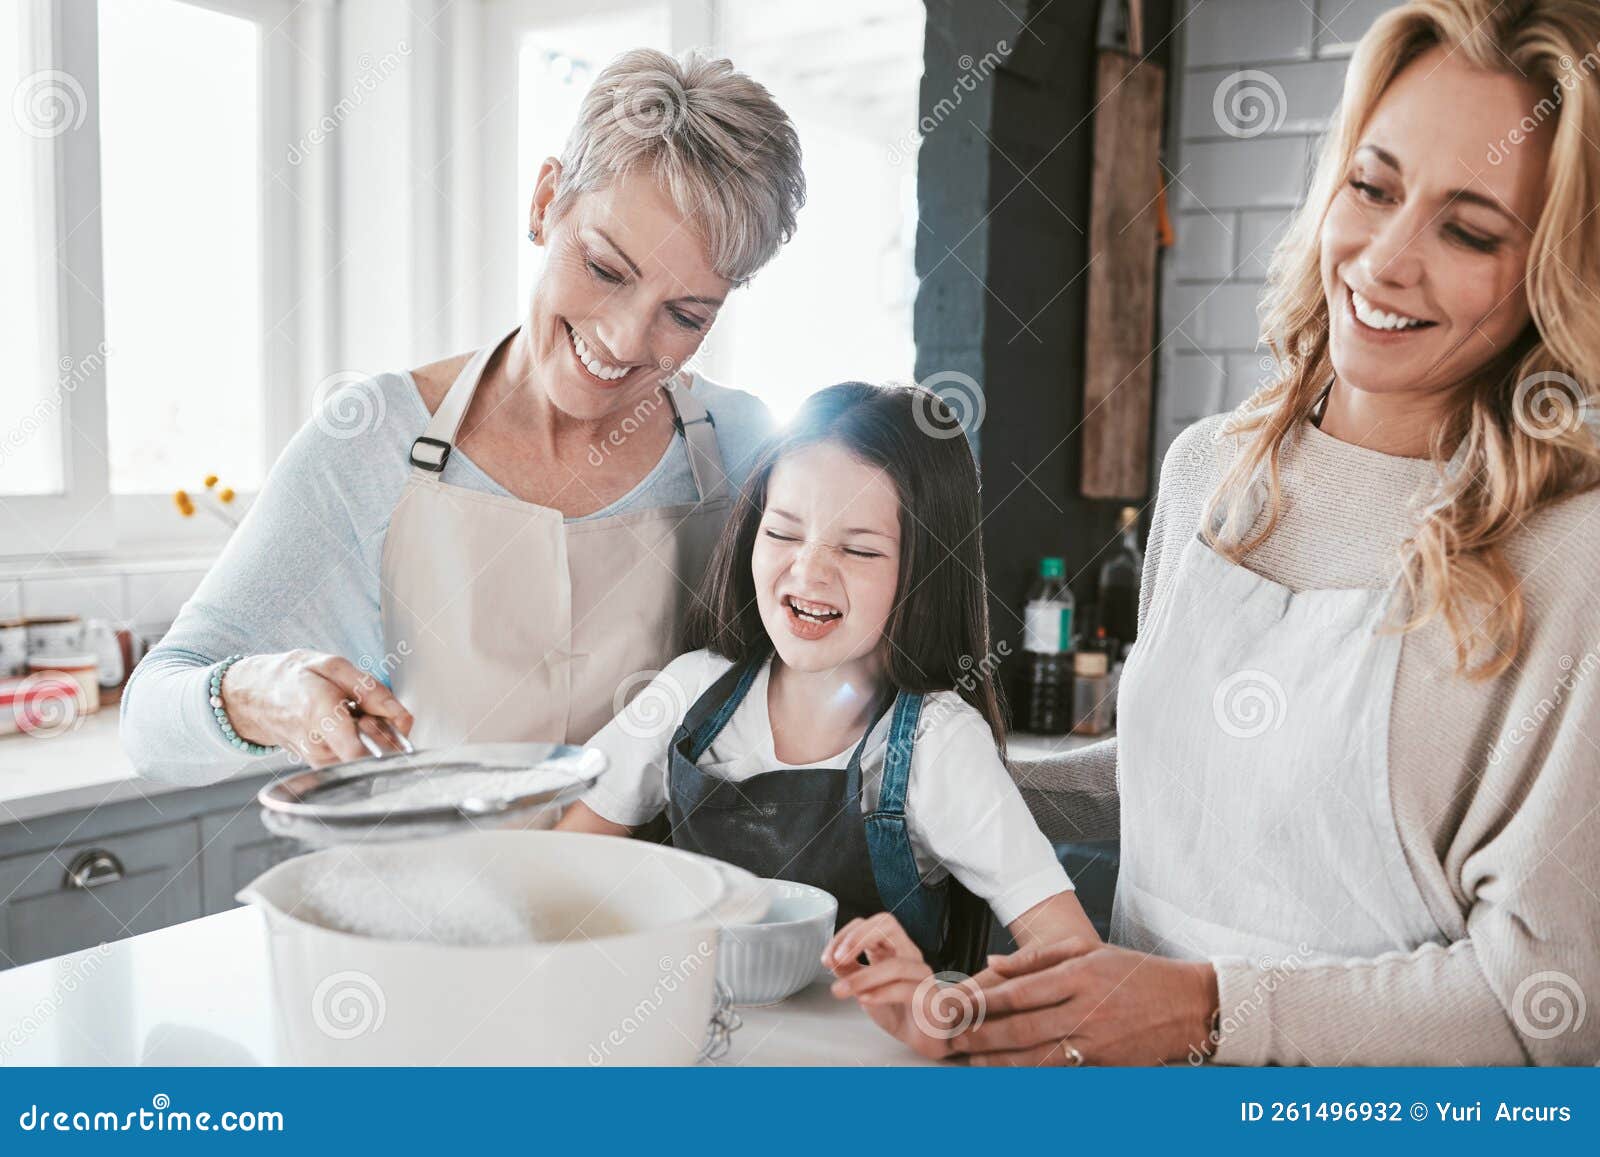 https://thumbs.dreamstime.com/z/family-grandmother-child-cooking-together-kitchen-learning-fun-quality-time-bonding-generations-grandma-teaching-kid-261496932.jpg